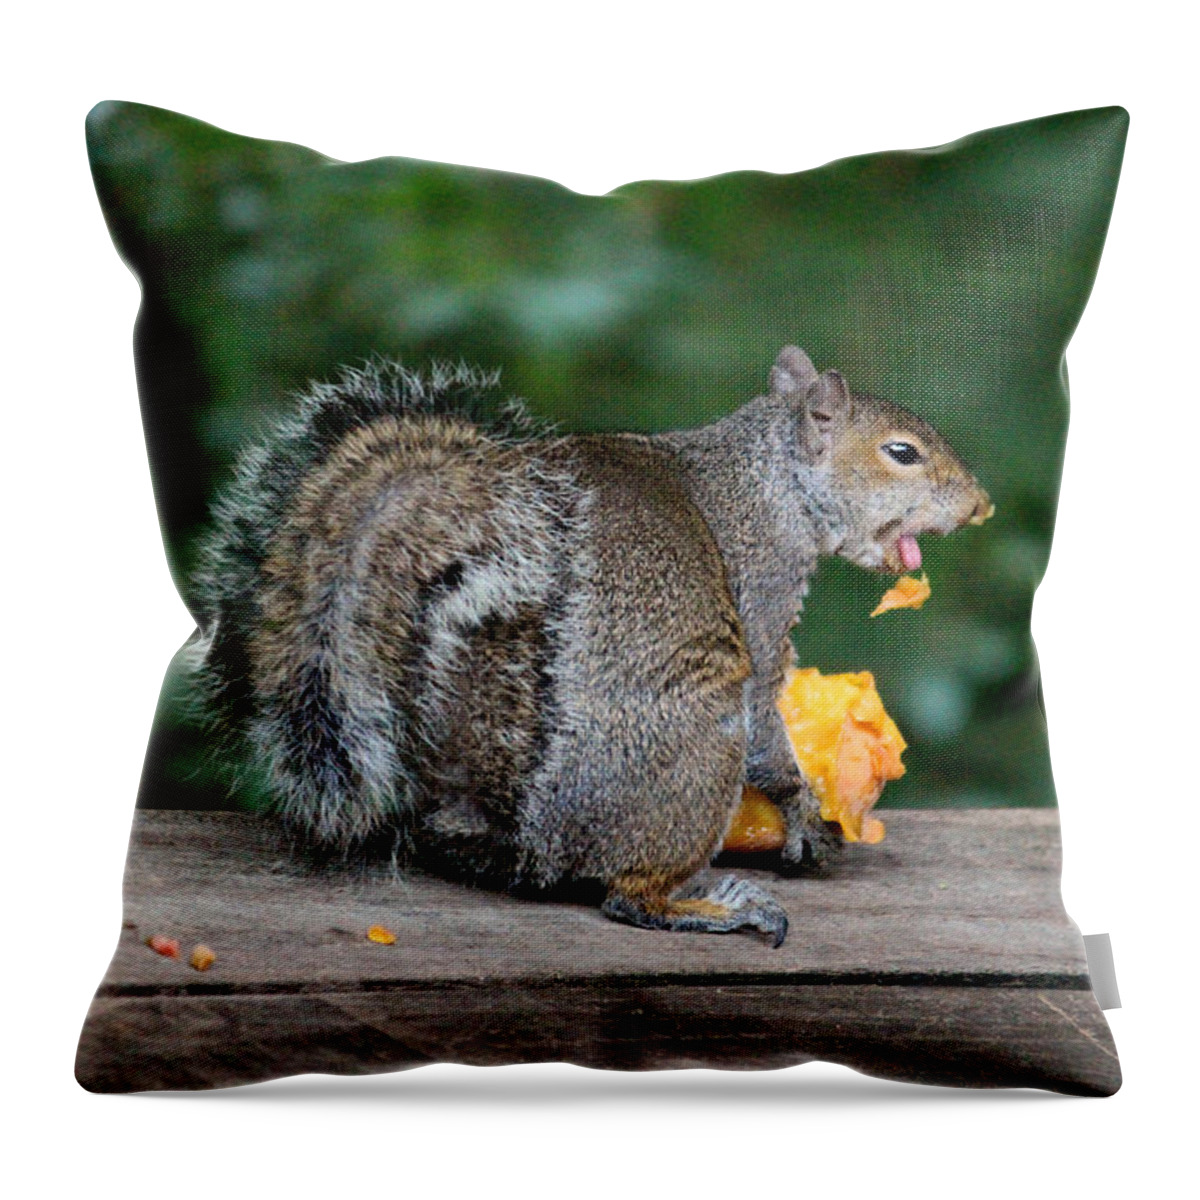 Mammals Throw Pillow featuring the photograph Yuk I hate peach fuzz by Kym Backland